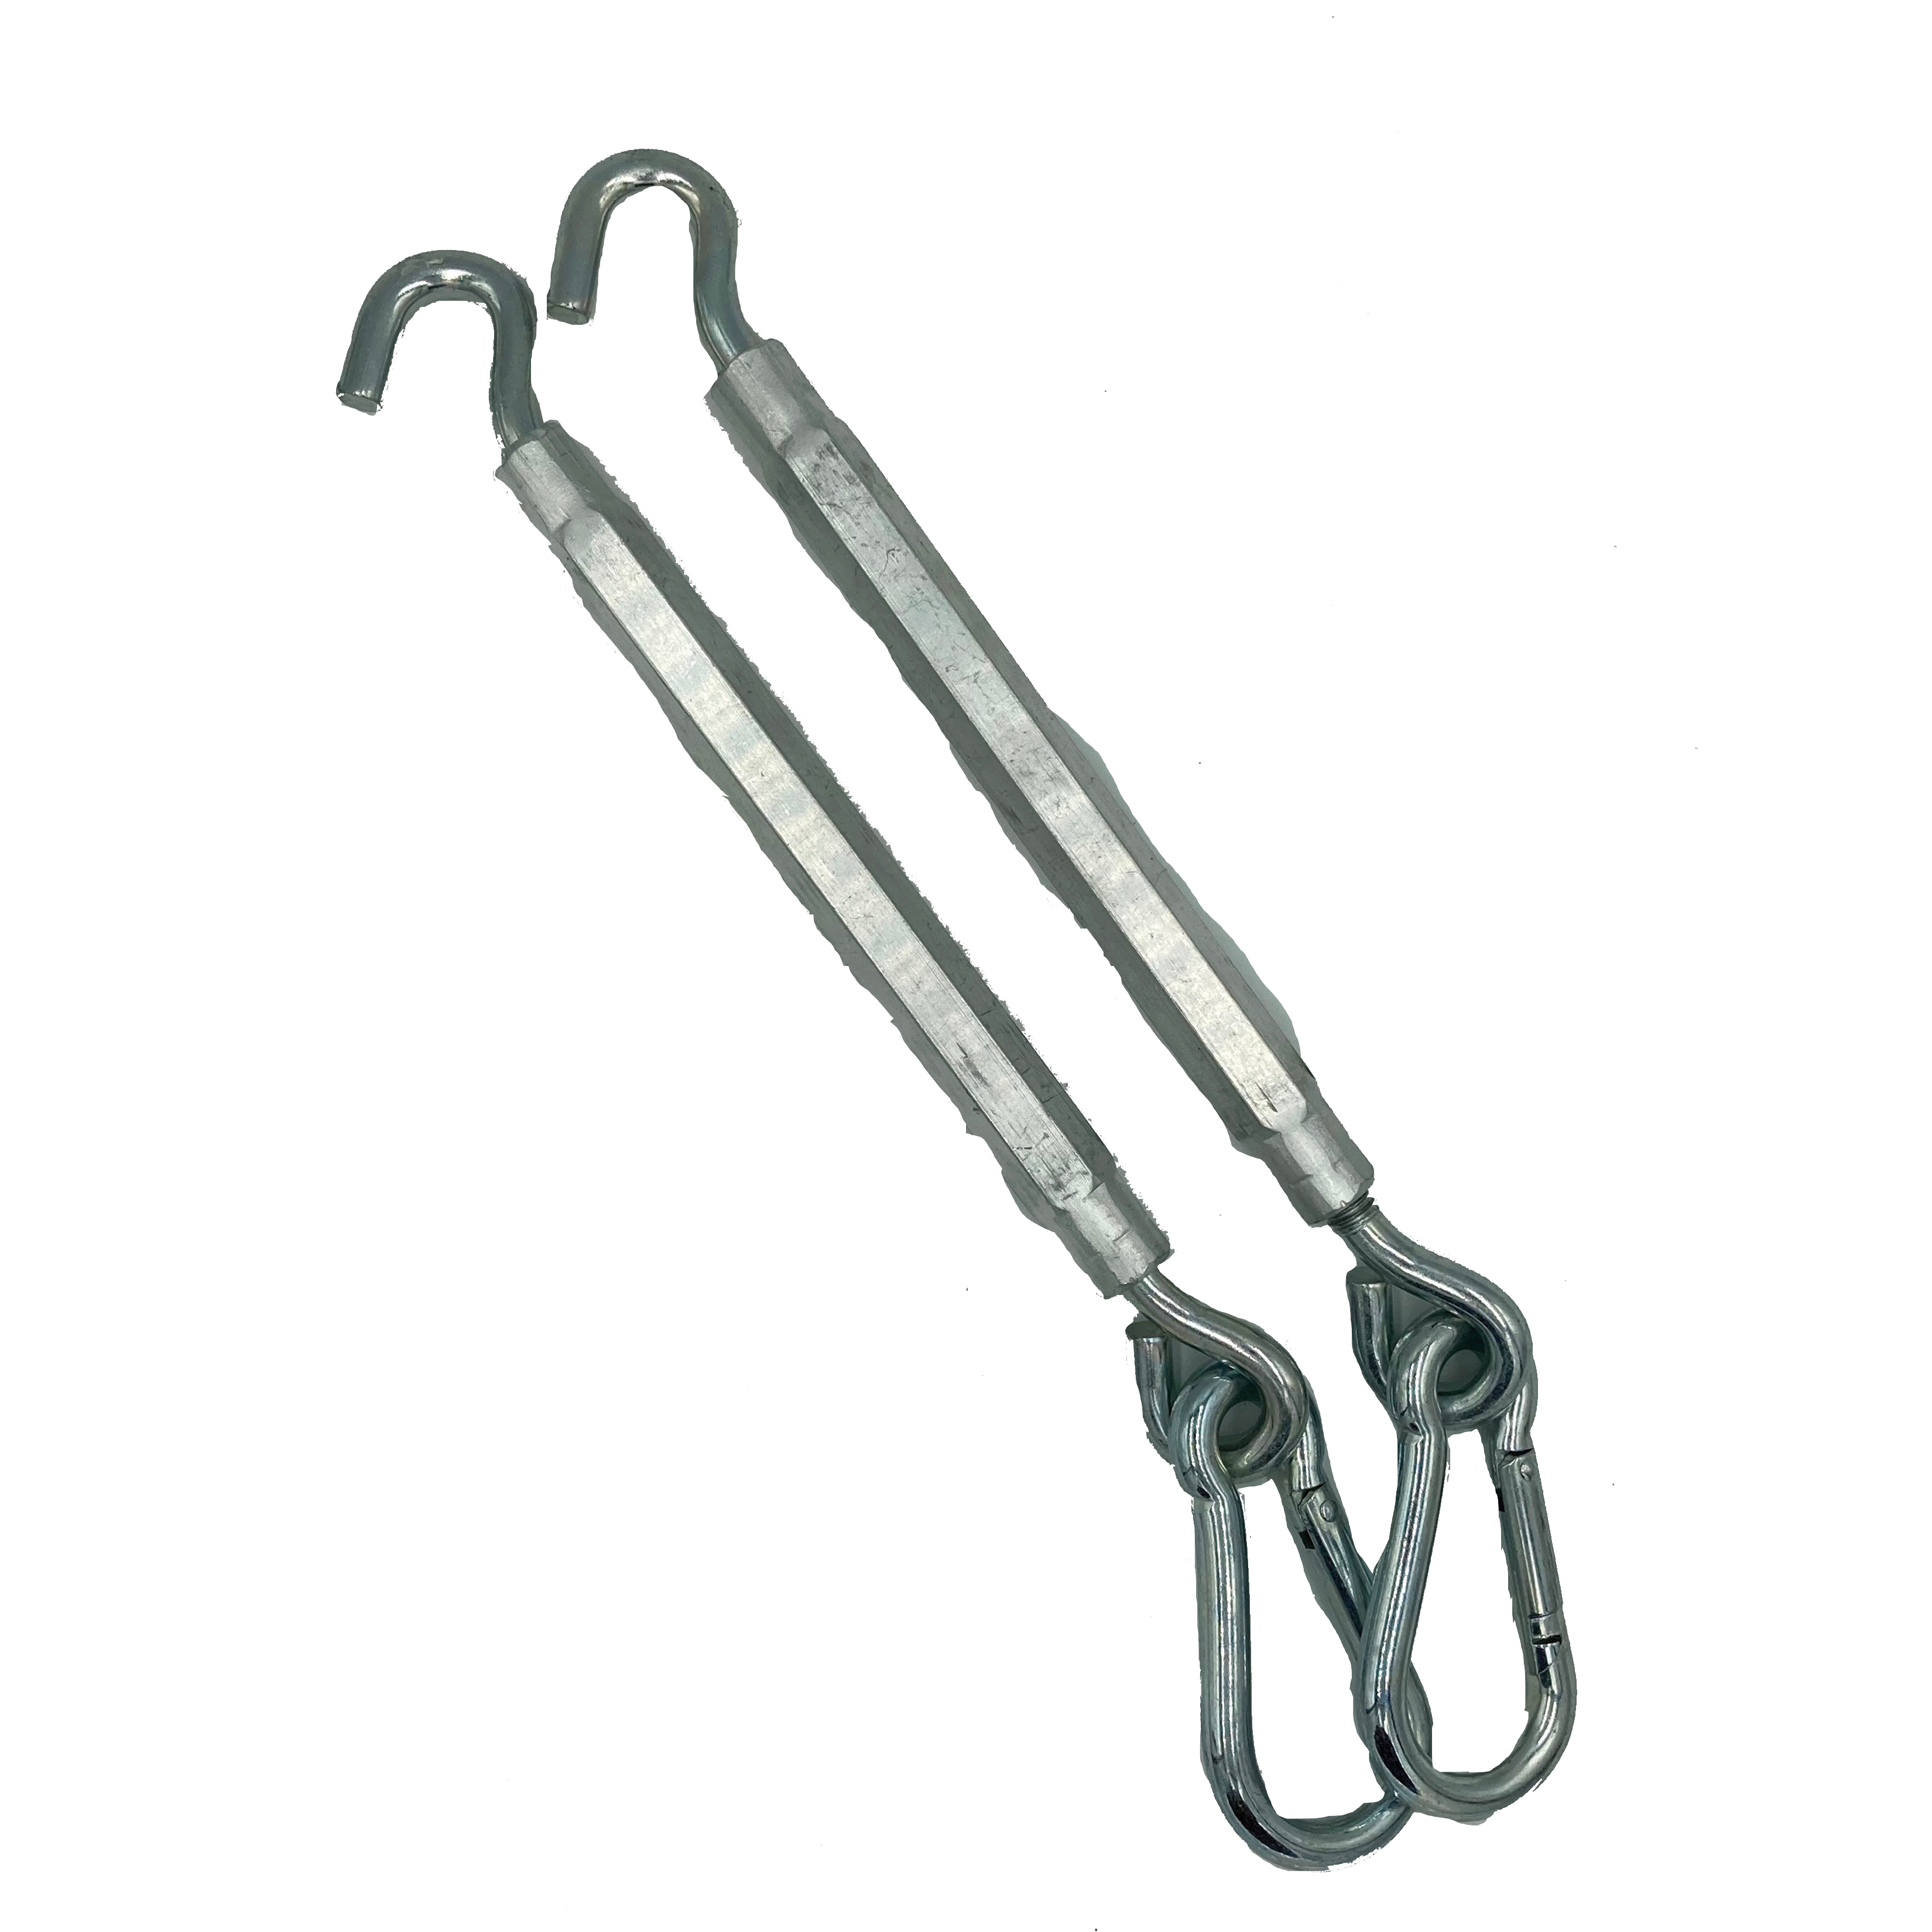 NiceRack | Turnbuckle Set with Carabiners